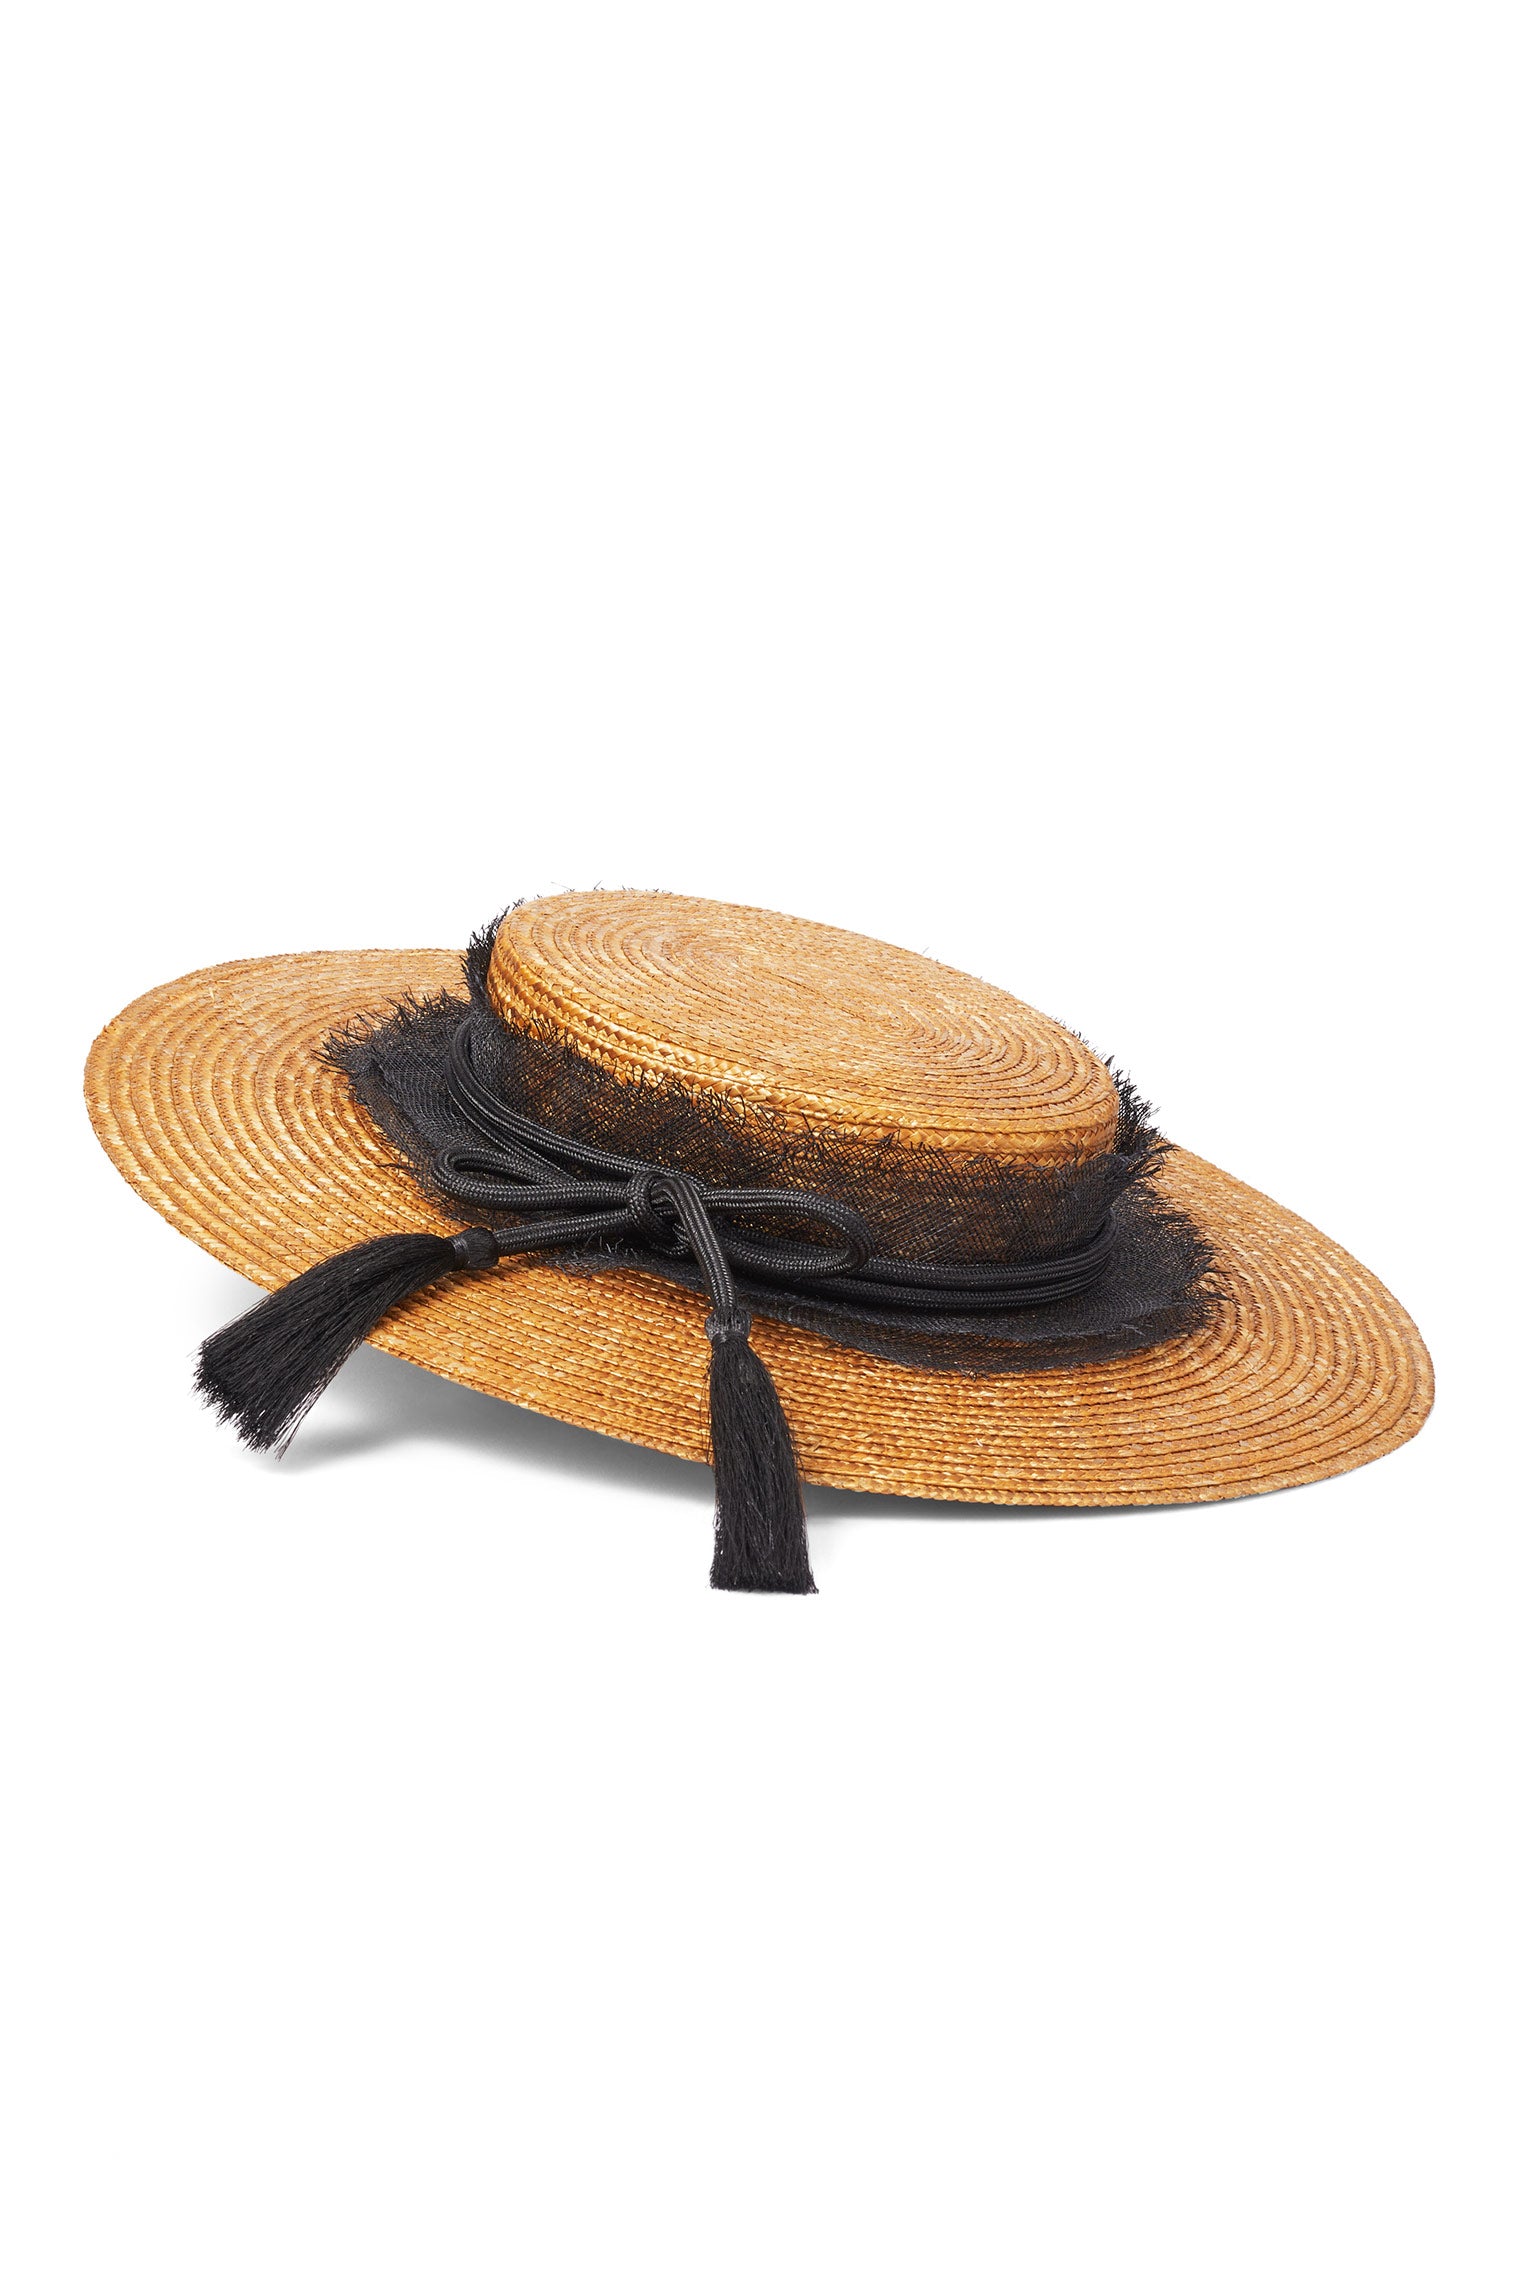 Nevada Boater - Products - Lock & Co. Hatters London UK